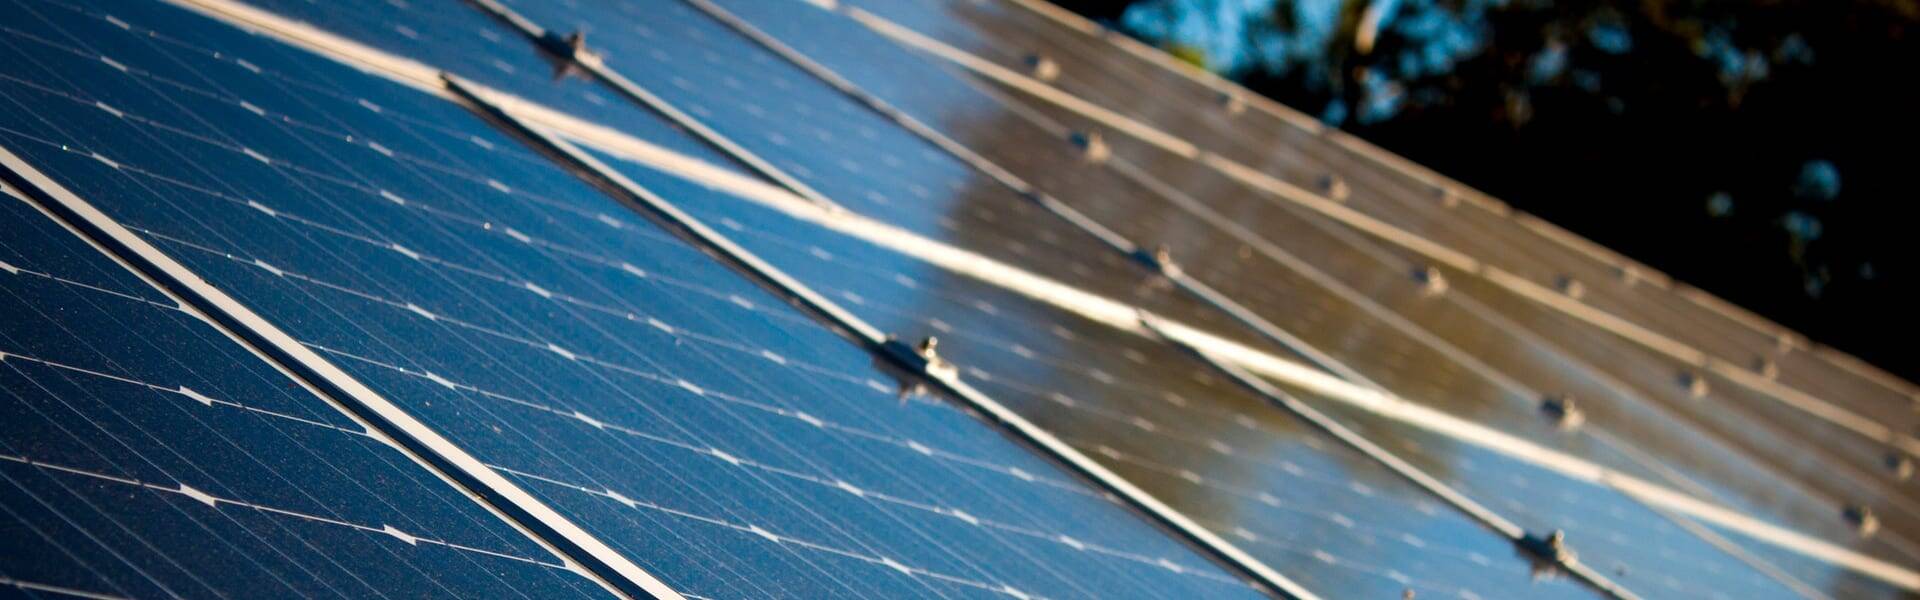 Affinity ramps up solar output